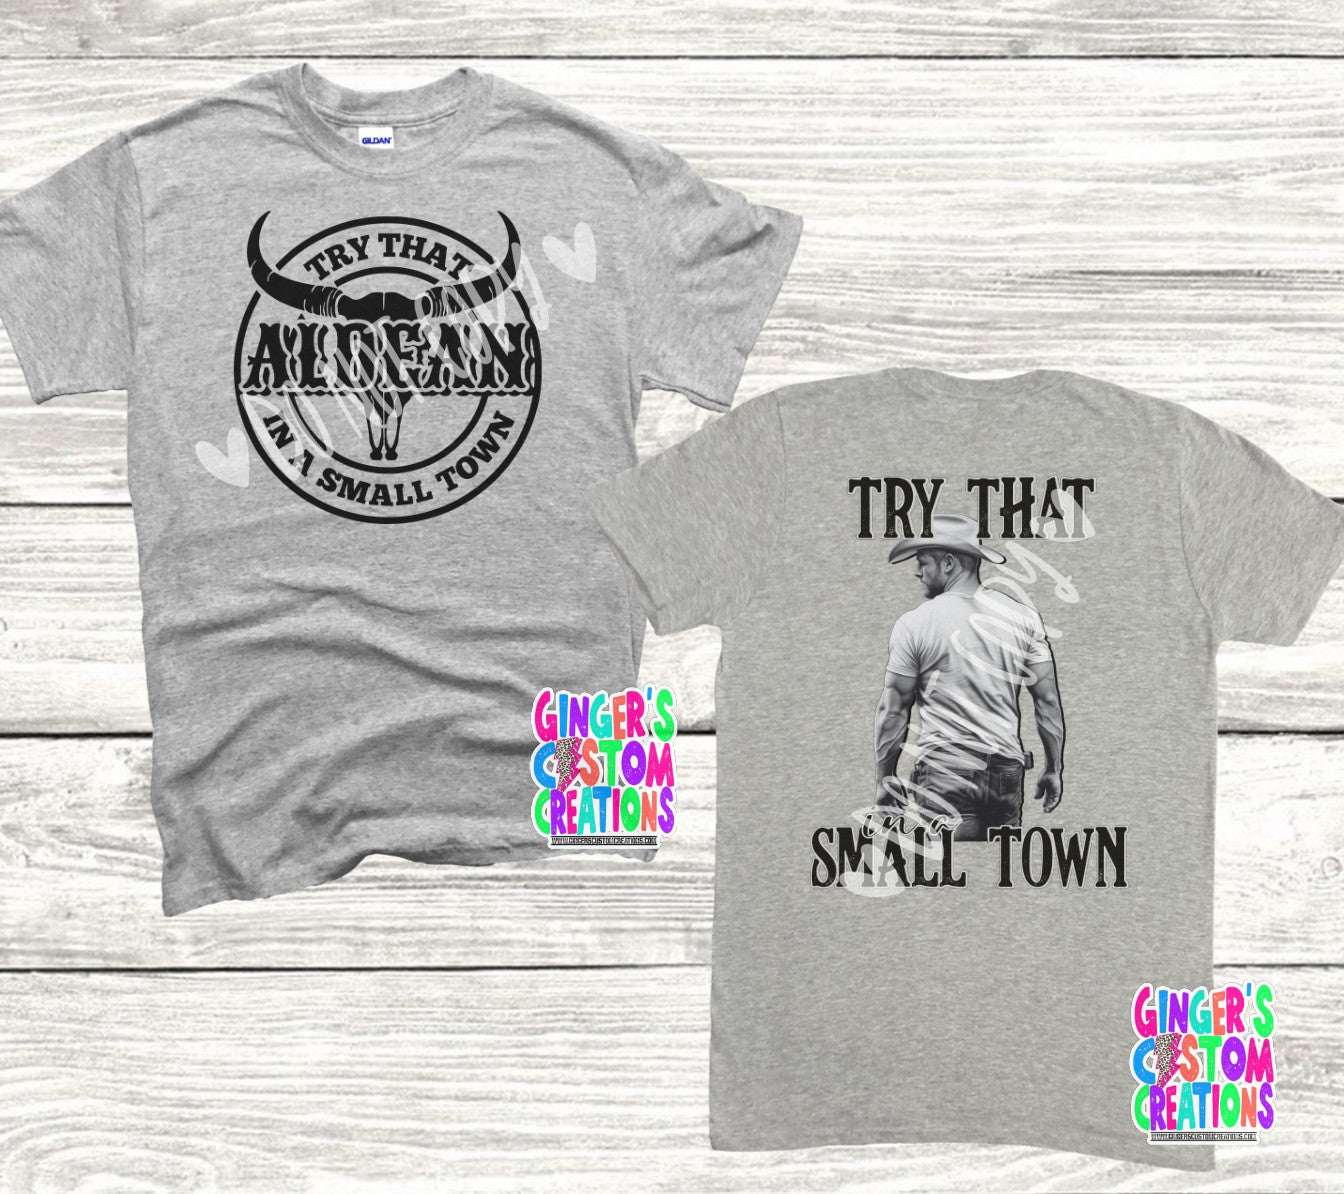 TRY THAT IN A SMALL TOWN front & back - ASH GREY TSHIRT